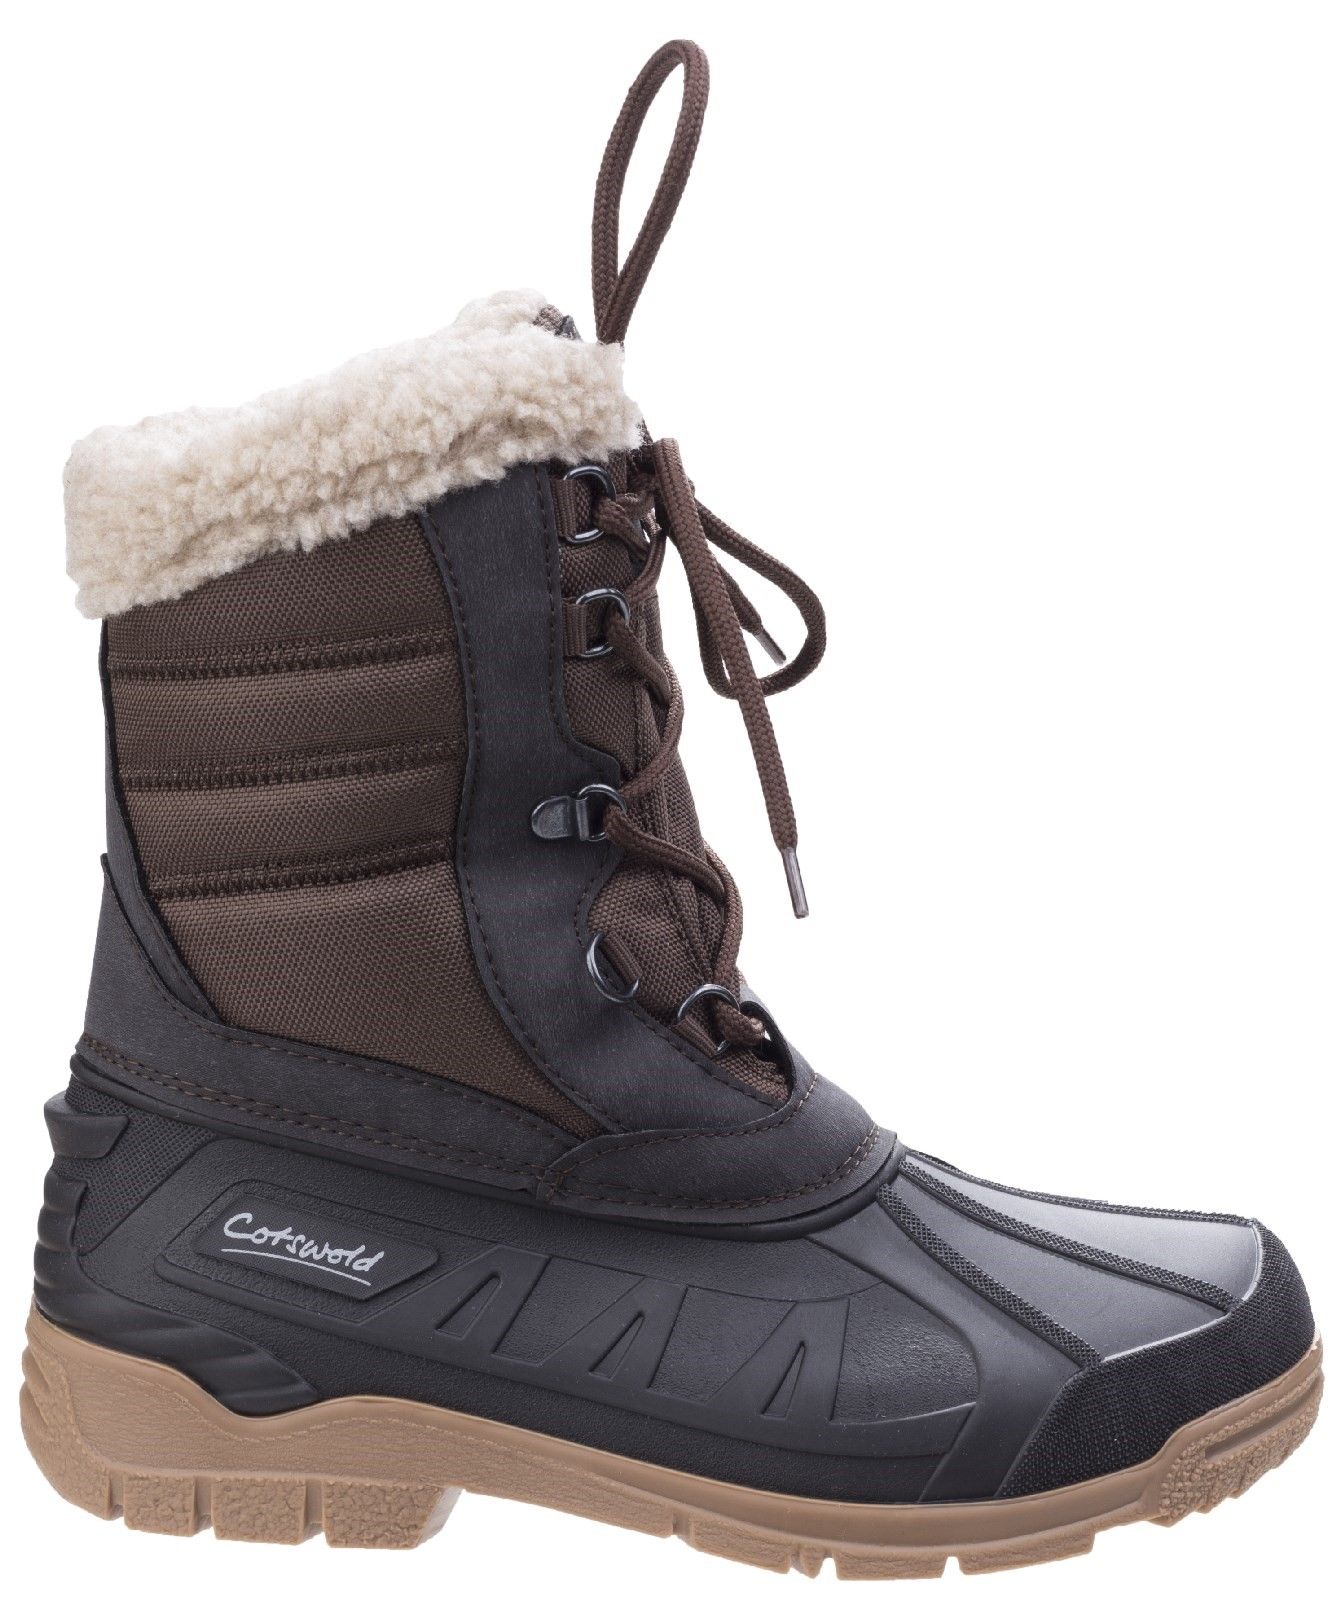 Coset Weather Boot